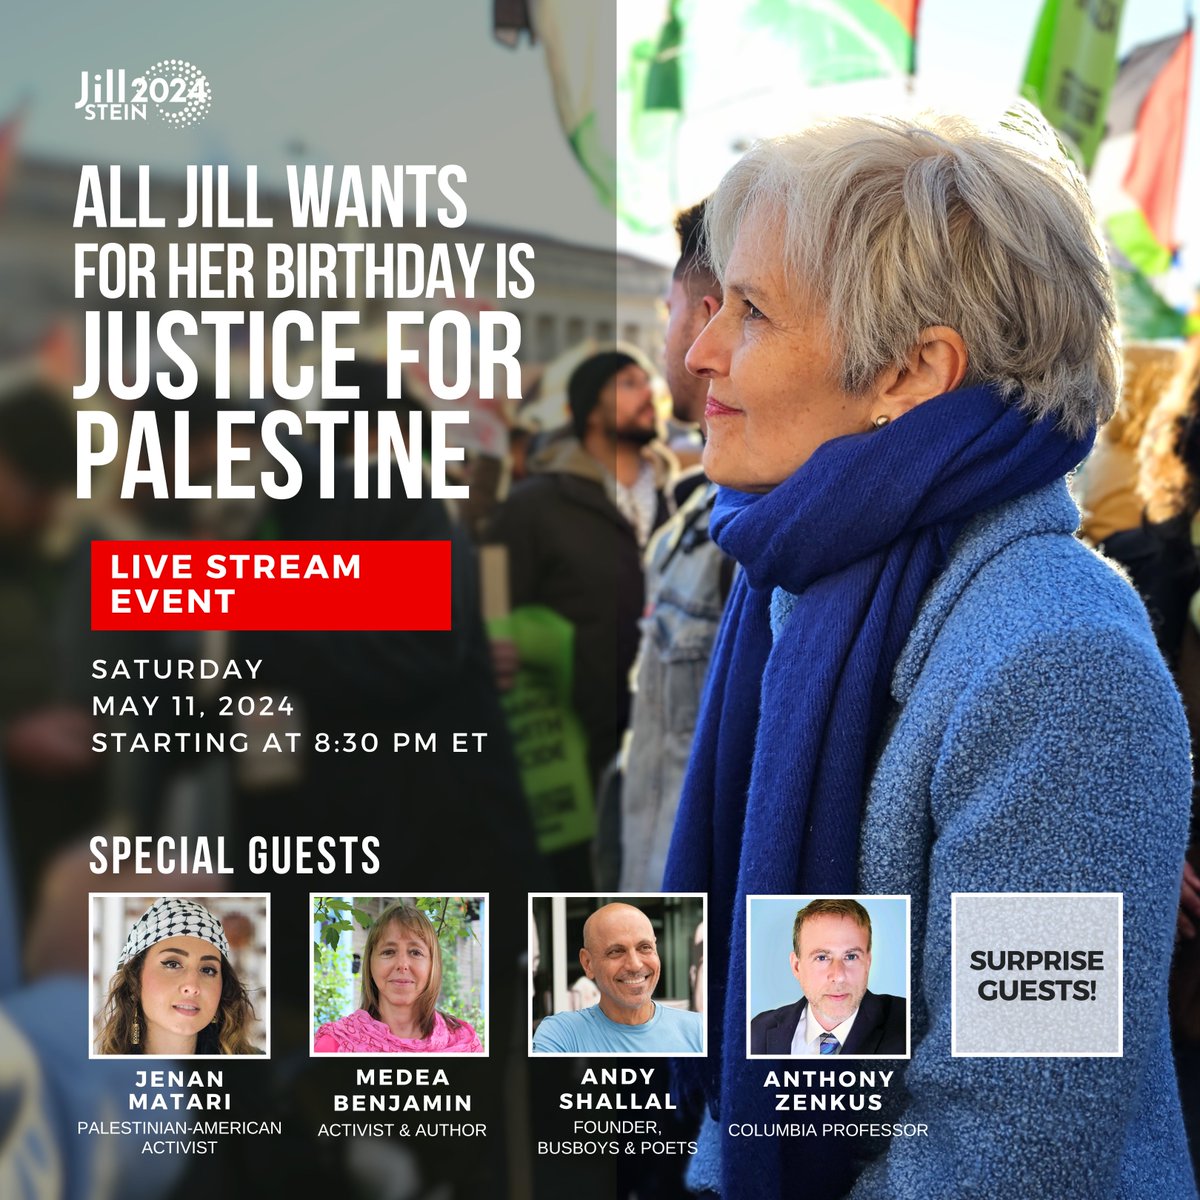 Join me Saturday with Jenan Matari, Medea Benjamin, Andy Shallal, Anthony Zenkus and more to power up our fight to make sure every voter in every state has an anti-genocide choice on their ballot!

RSVP and spread the word! jillstein2024.com/birthdayevent